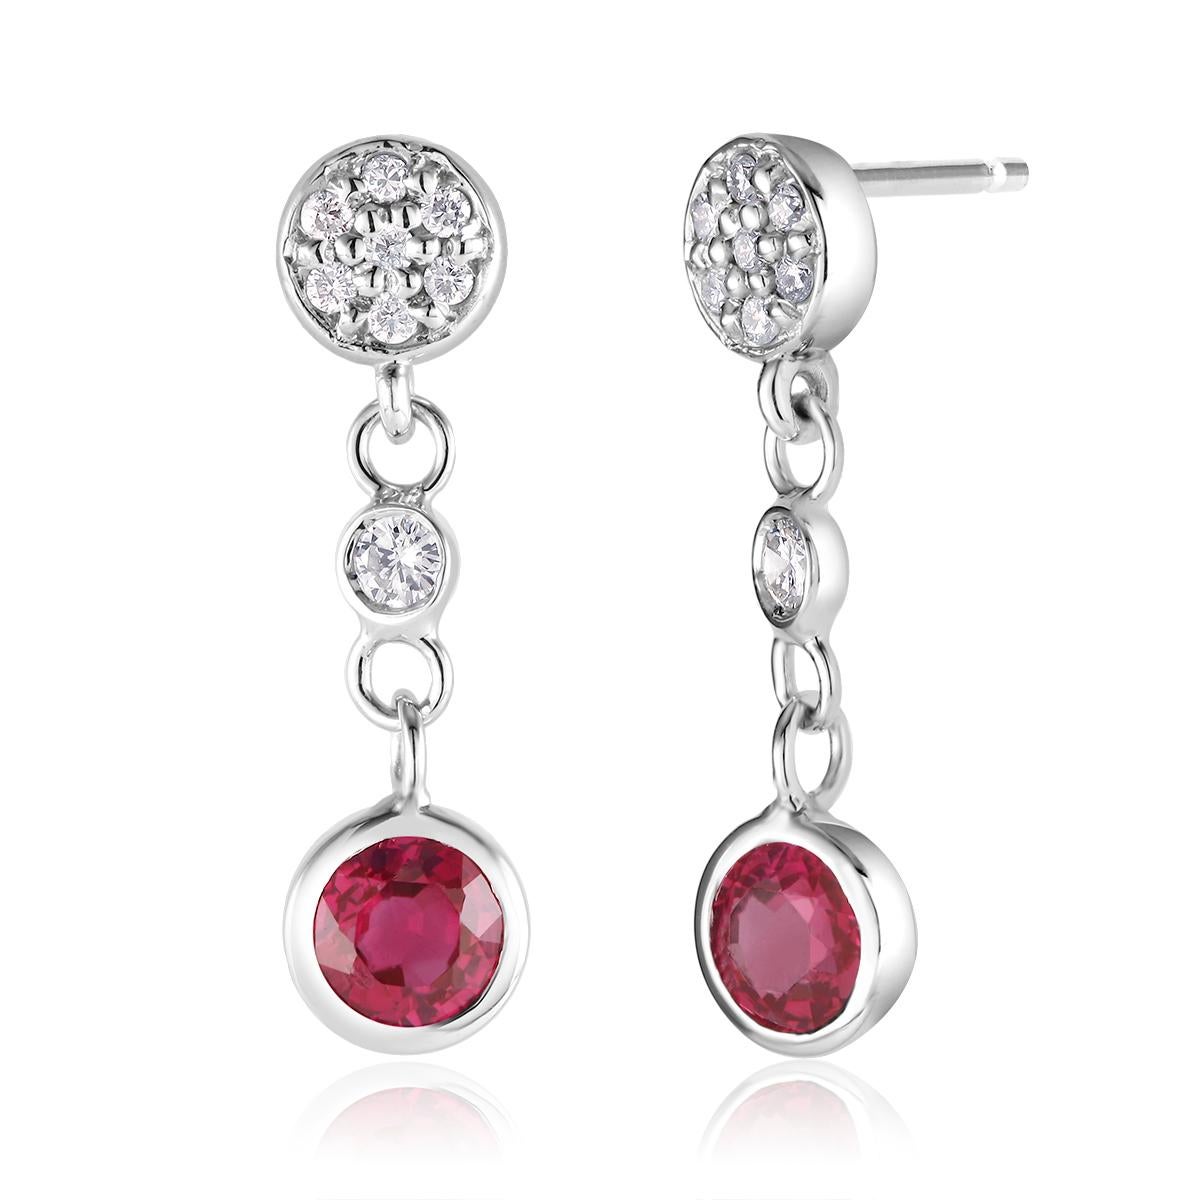 Contemporary Diamond and Round Ruby Drop Earrings Weighing 1.38 Carat